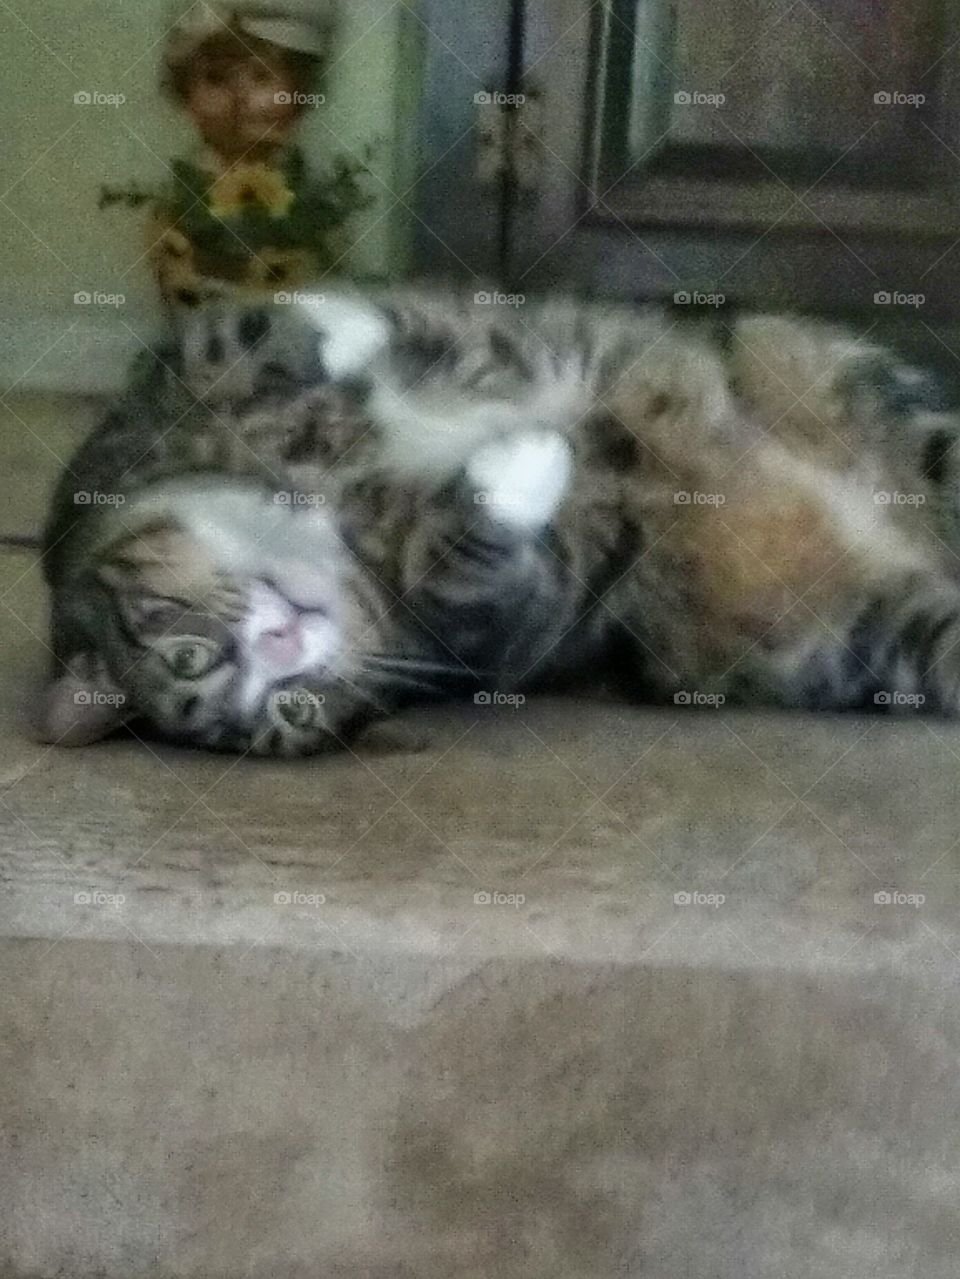 Louie the Tabby cat. my cat greeting me as i walk up the stairs.